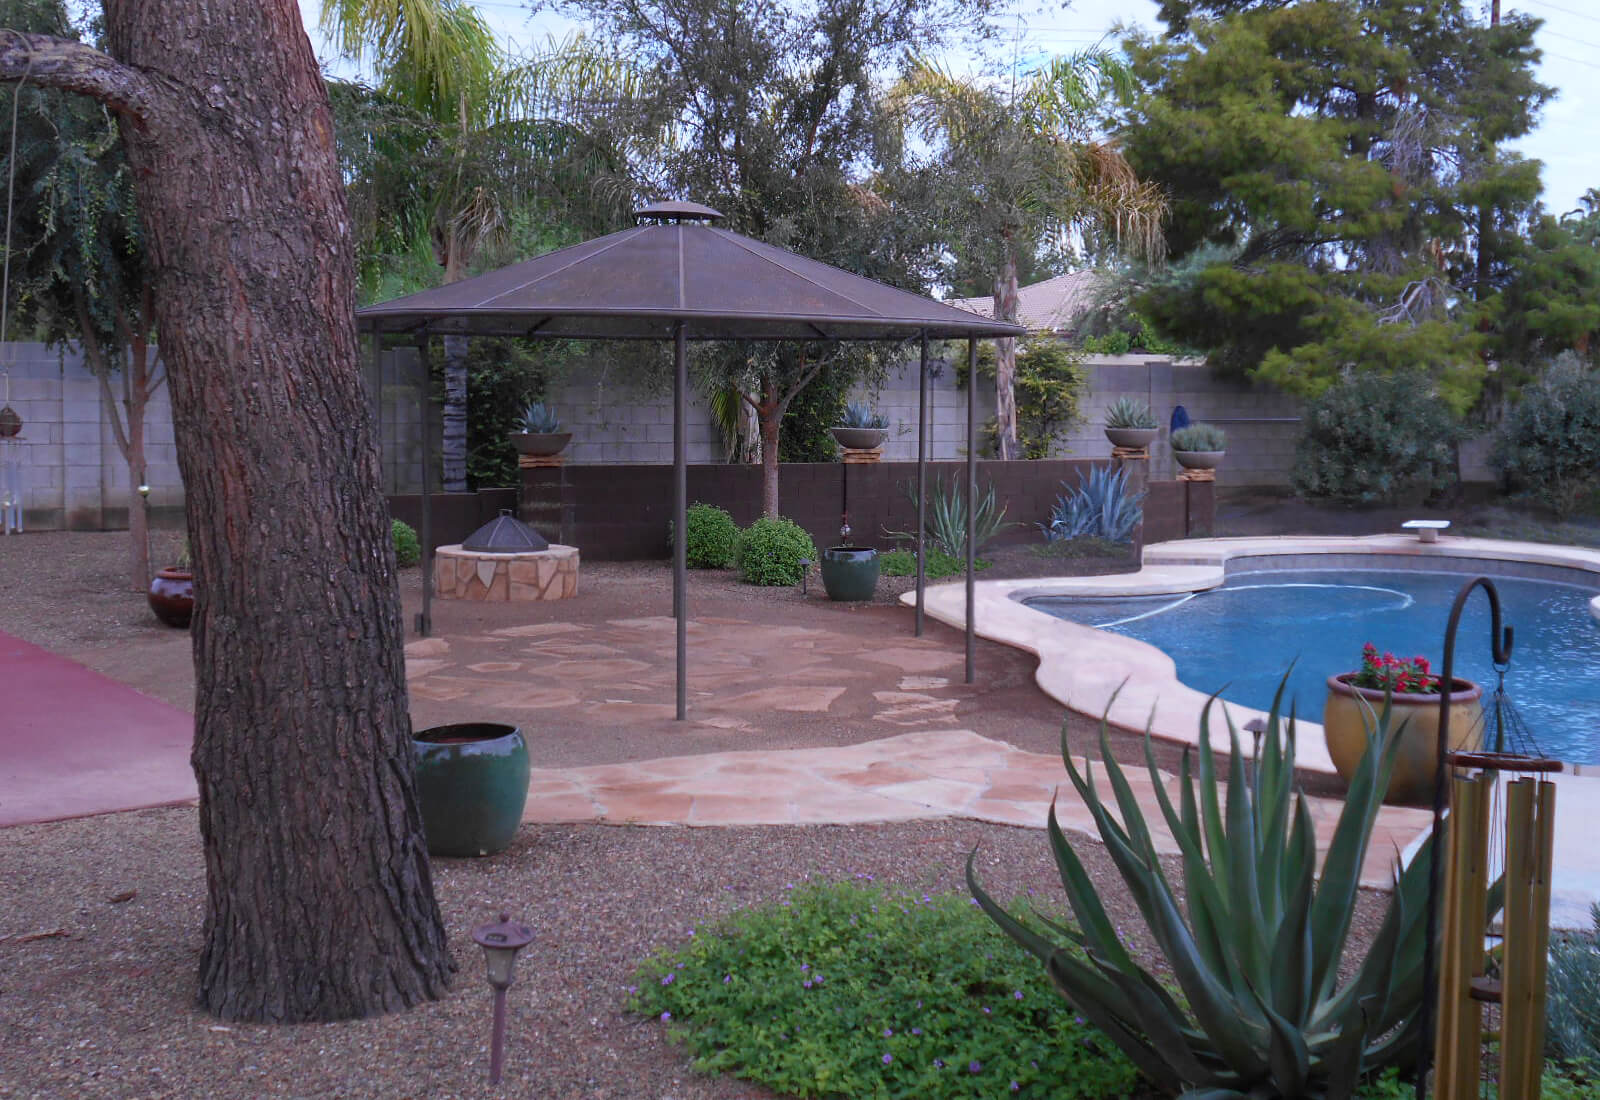 Photo of a backyard with a flagstone paver patio under a round metal shade structure. Next to the patio is a bean-shaped pool. The yard is shaded by pine trees and palm trees and is filled with flowering shrubs and agaves.